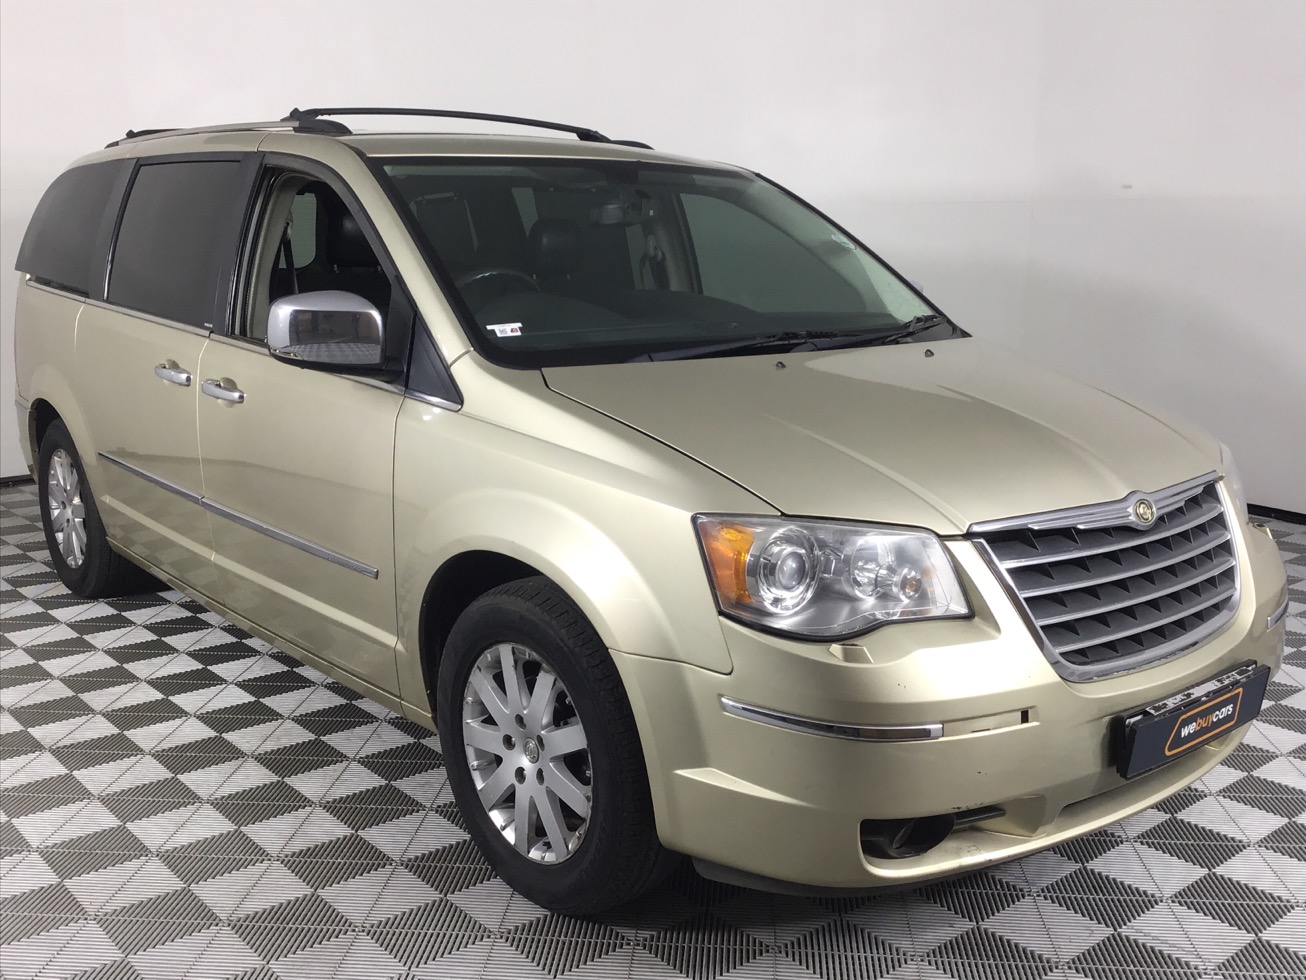 grand voyager 2010